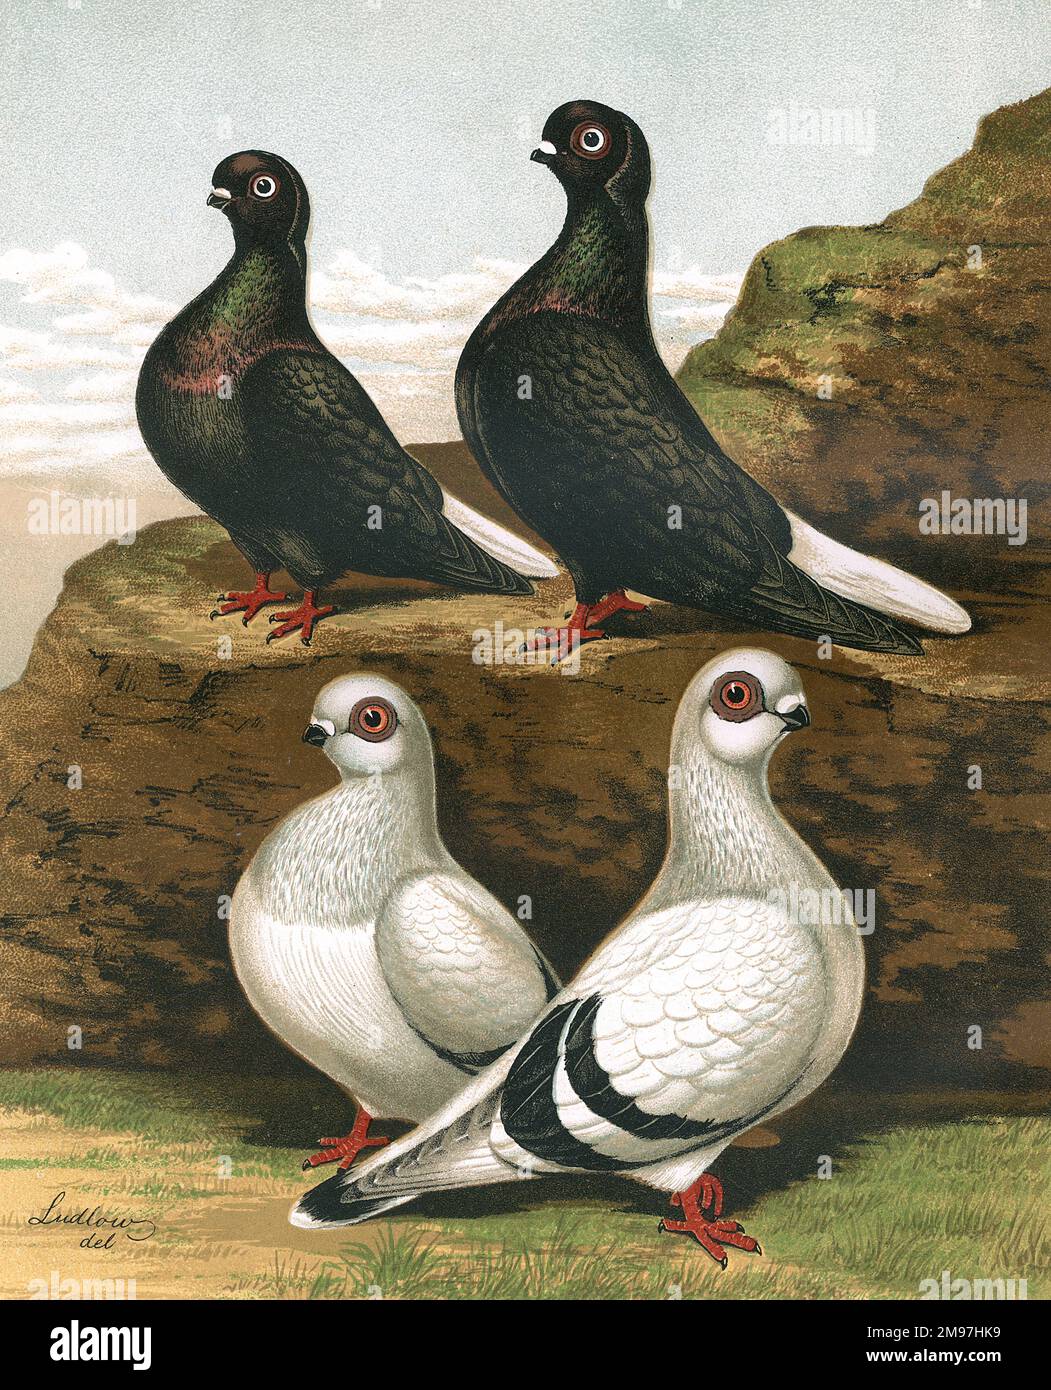 An illustration showing two Black Capuchins, also known as Syrian Wammentauben Beirut pigeons, and two Damascenes in an outdoor scenery. Both breeds are thought to have originated from Syria, and they both are a breed of fancy pigeon. The portrait illustrates their contrasting plumage colourations and markings, though both similarly have short-faced and short-beaked features. Stock Photo